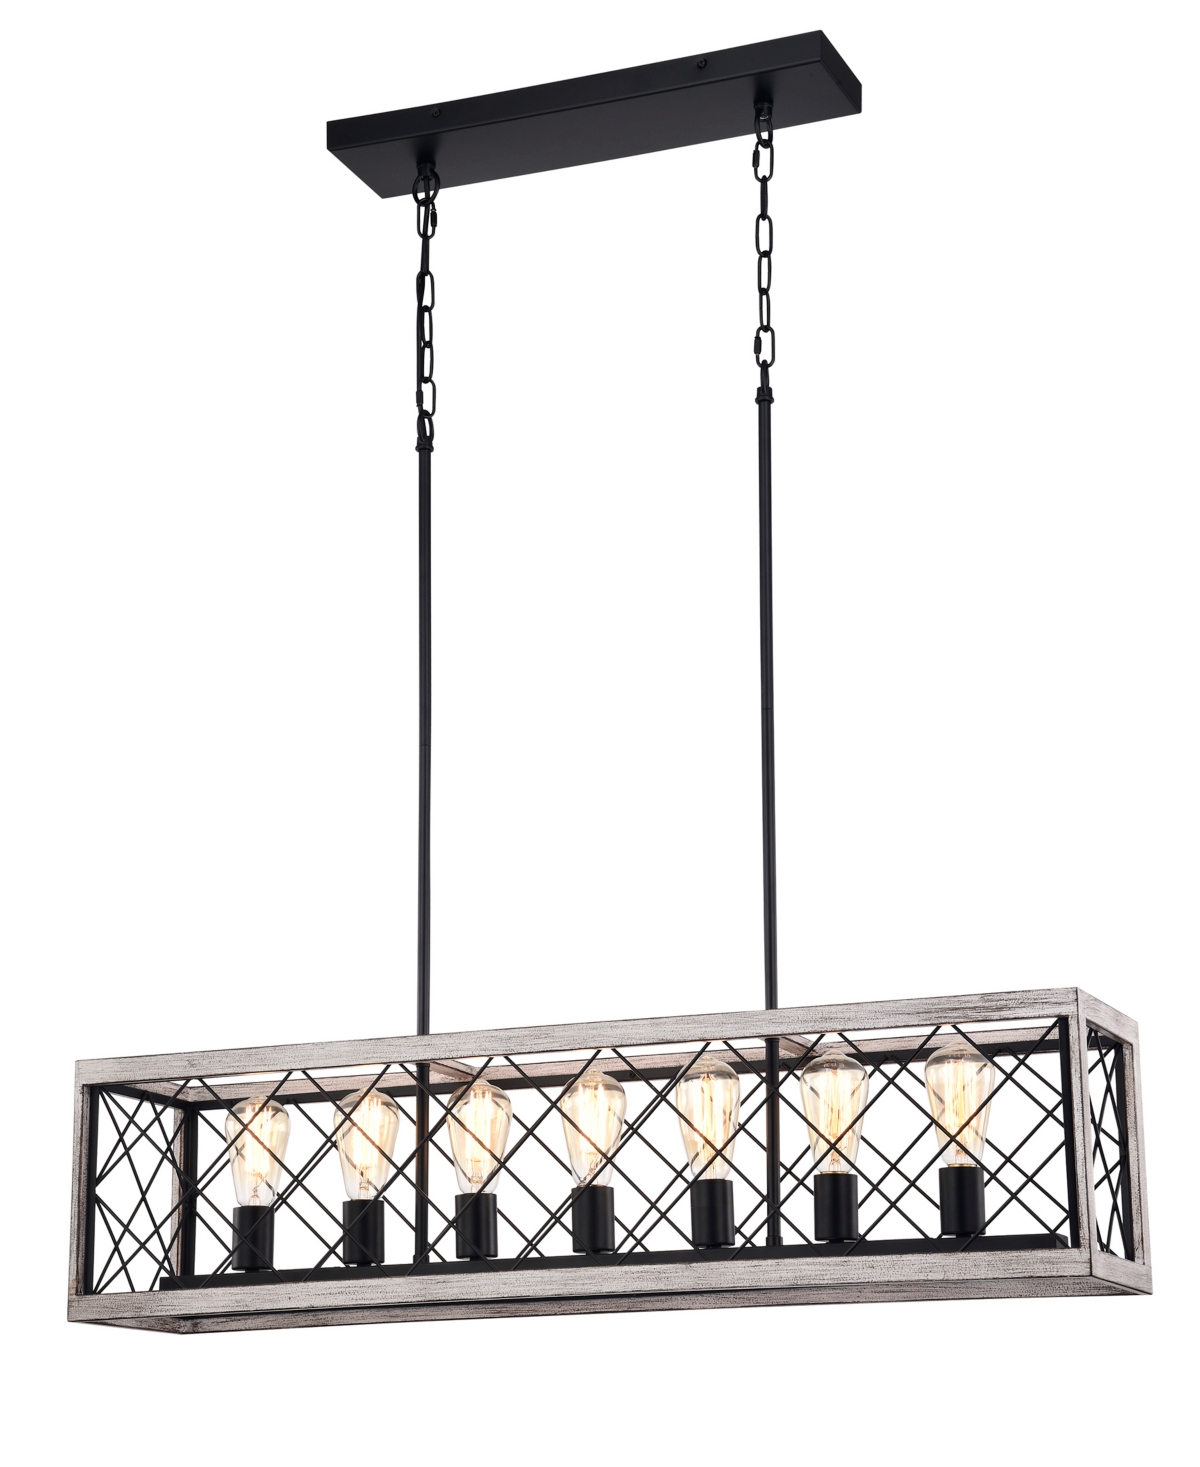 Home Accessories Twinkle 40" 7-light Indoor Chandelier With Light Kit In Matte Black And Faux Wood Grain